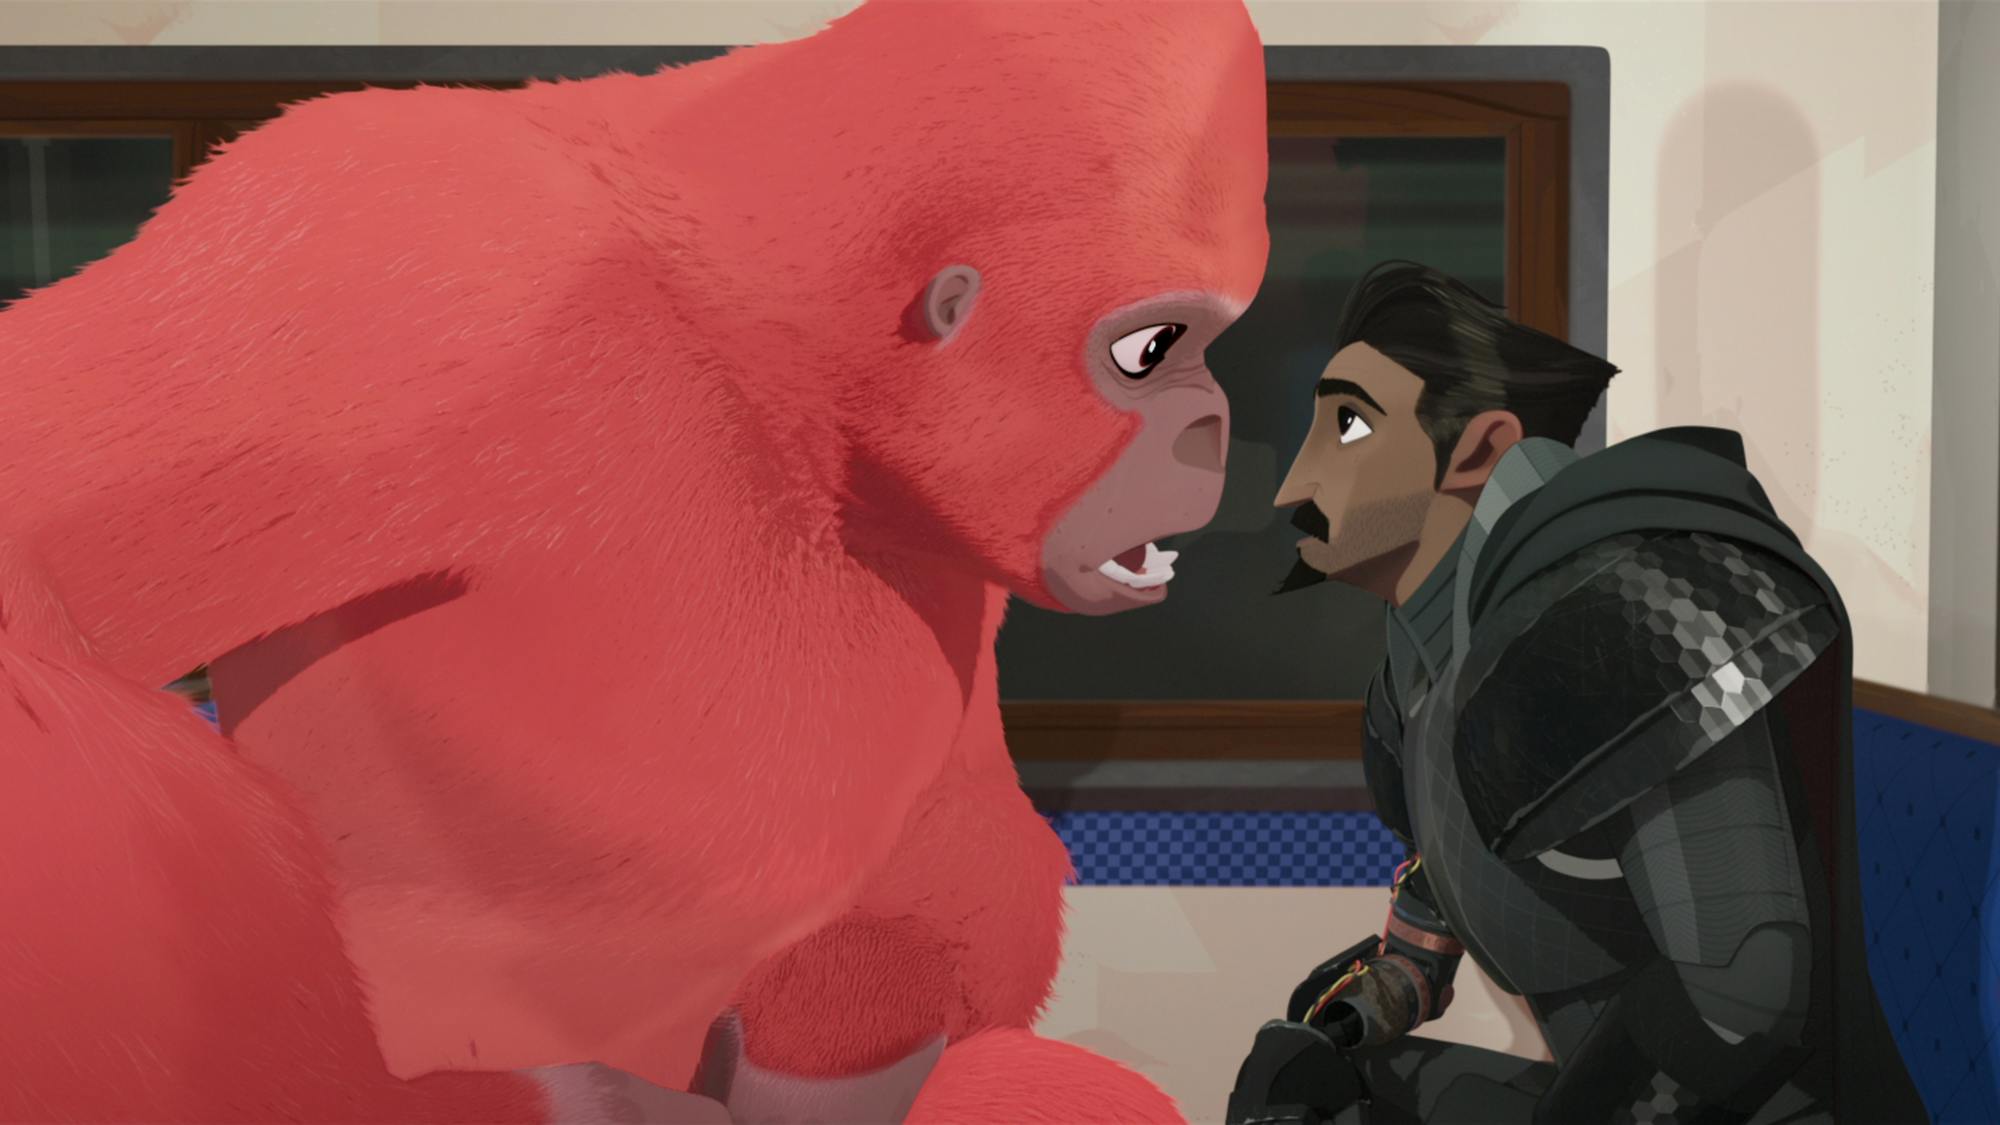 Nimona (Chloë Grace Moretz) as a gorilla and Ballister Boldheart (Riz Ahmed) sit across from each other on blue couches.